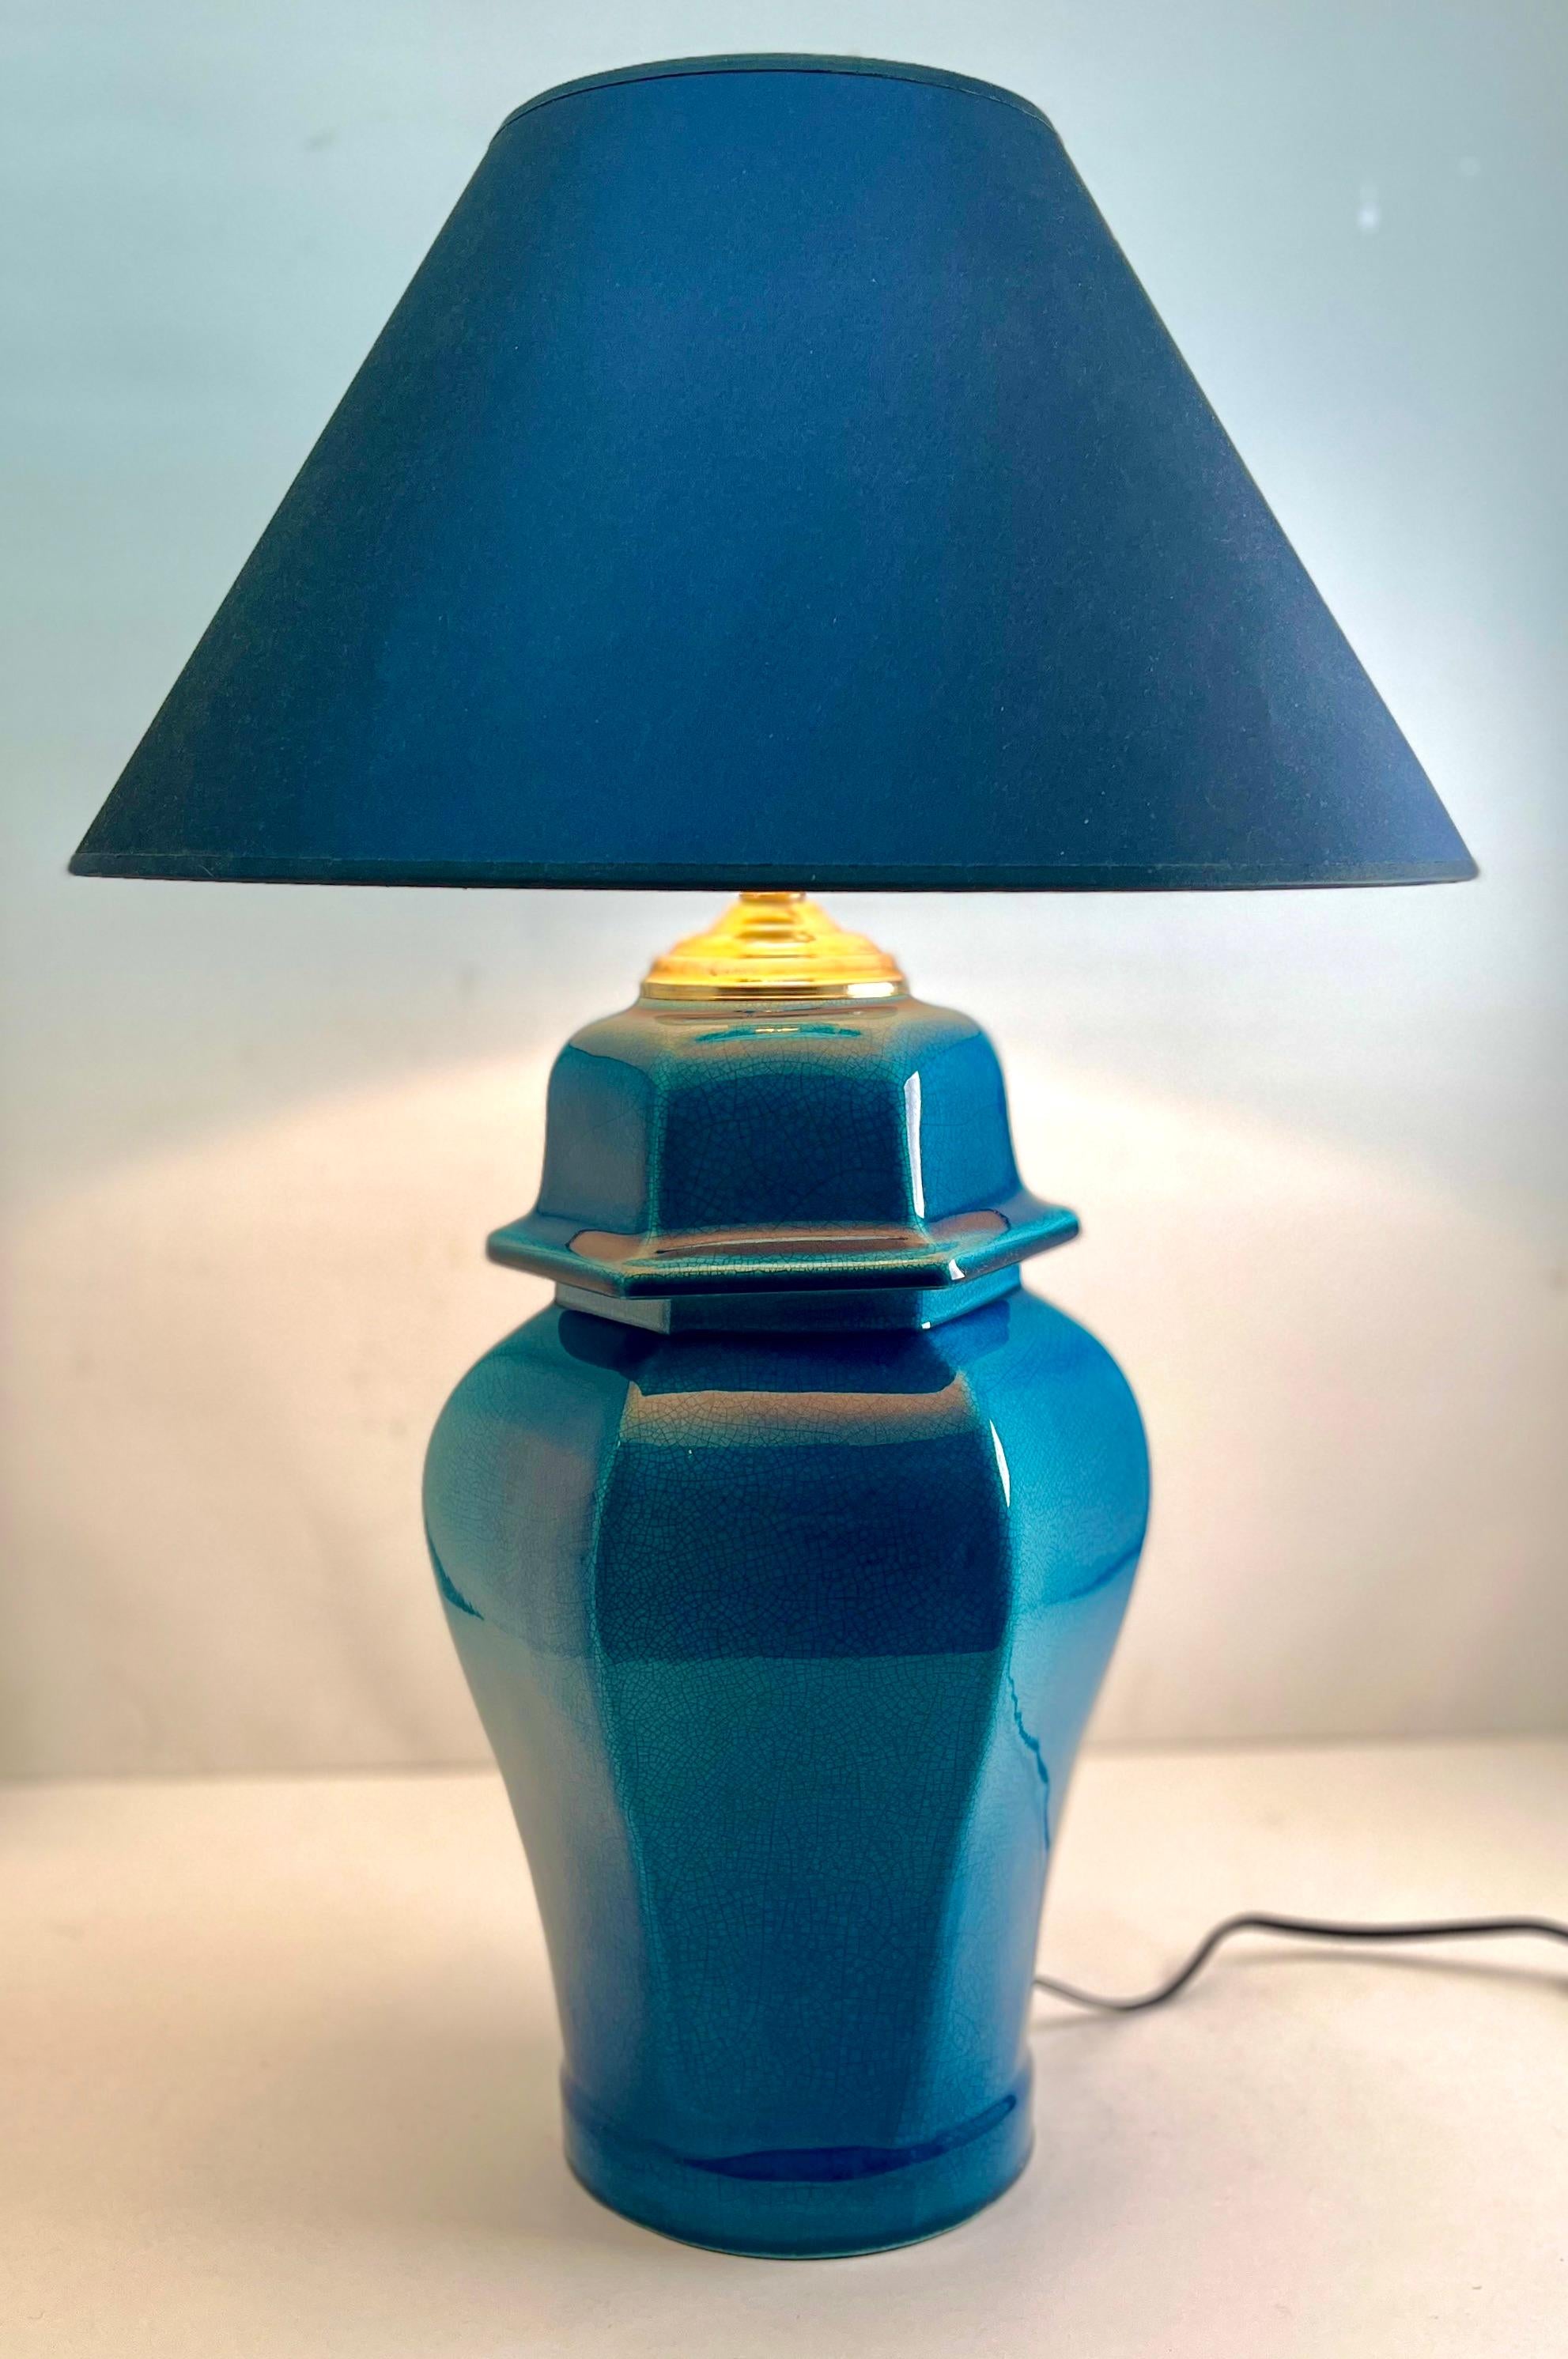 Inspired by a centuries-old technique of Chinese ceramics, this elegant table lamp is a bright and dramatic shade of turquoise with a fine crackle glaze. 
The dimensions are measured without a lampshade.

Renewed and rewired with pedestal lamp